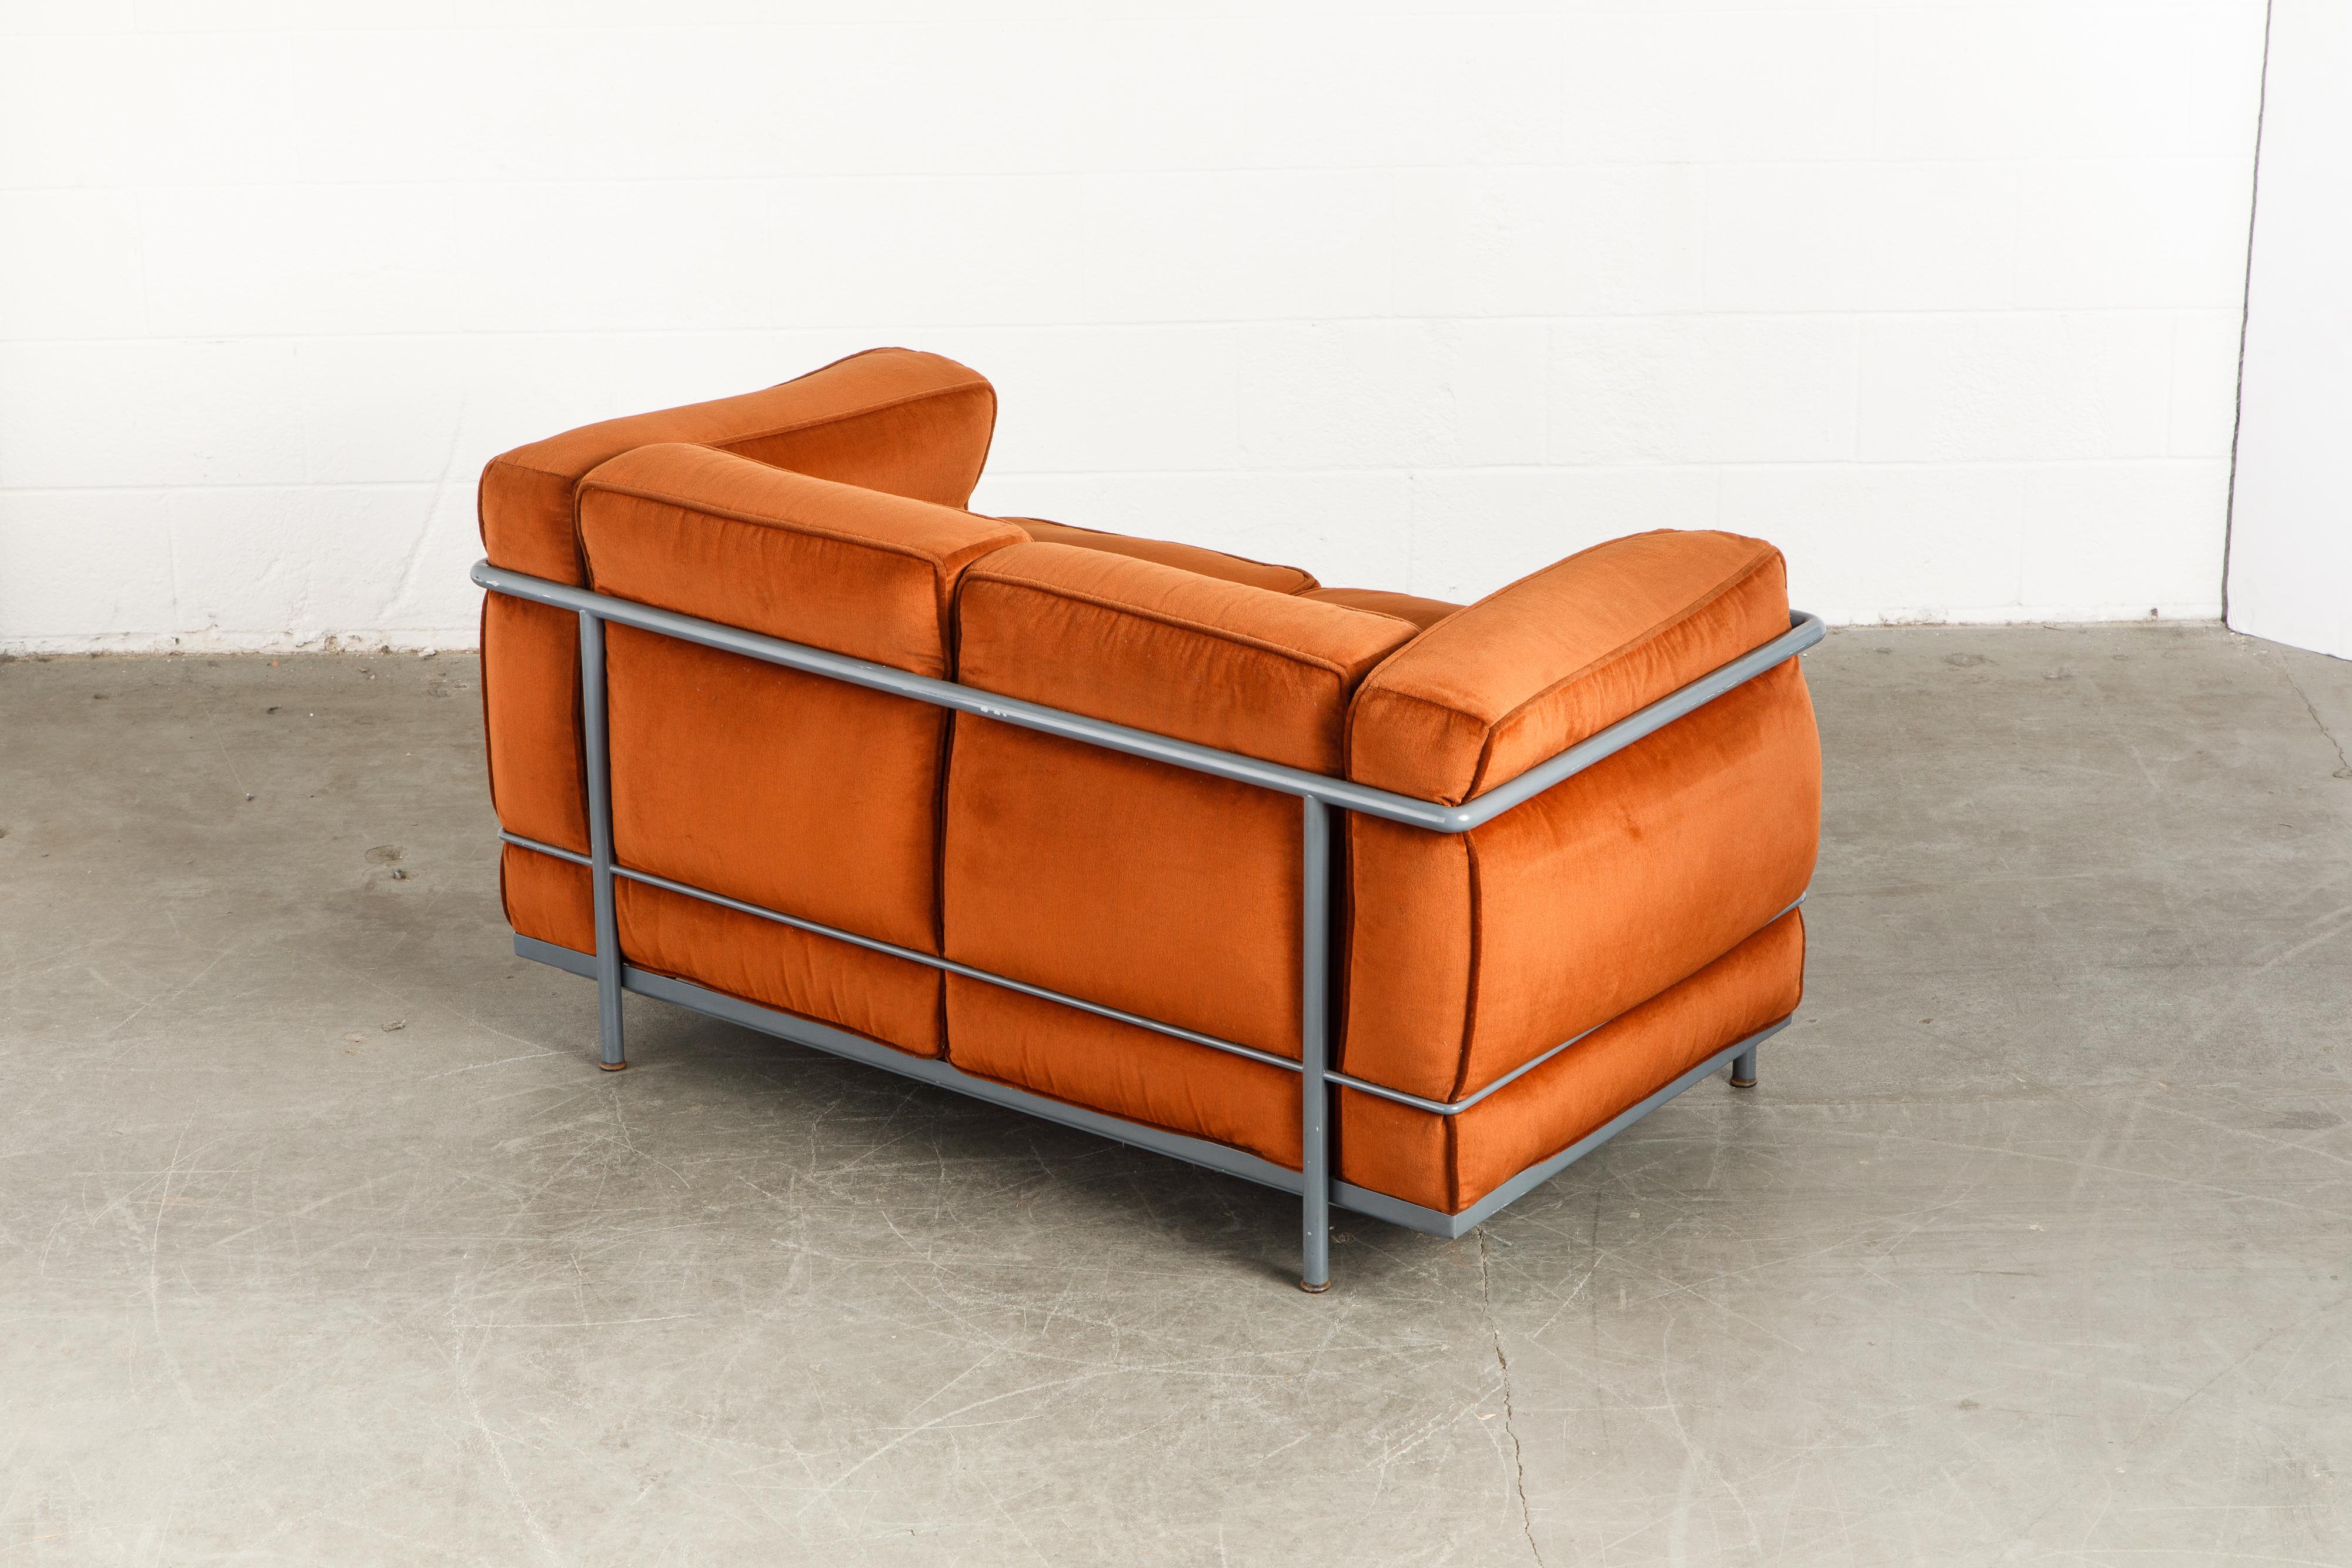 Bauhaus Early Production LC2 Loveseat Sofa by Le Corbusier for Cassina, c. 1965, Signed